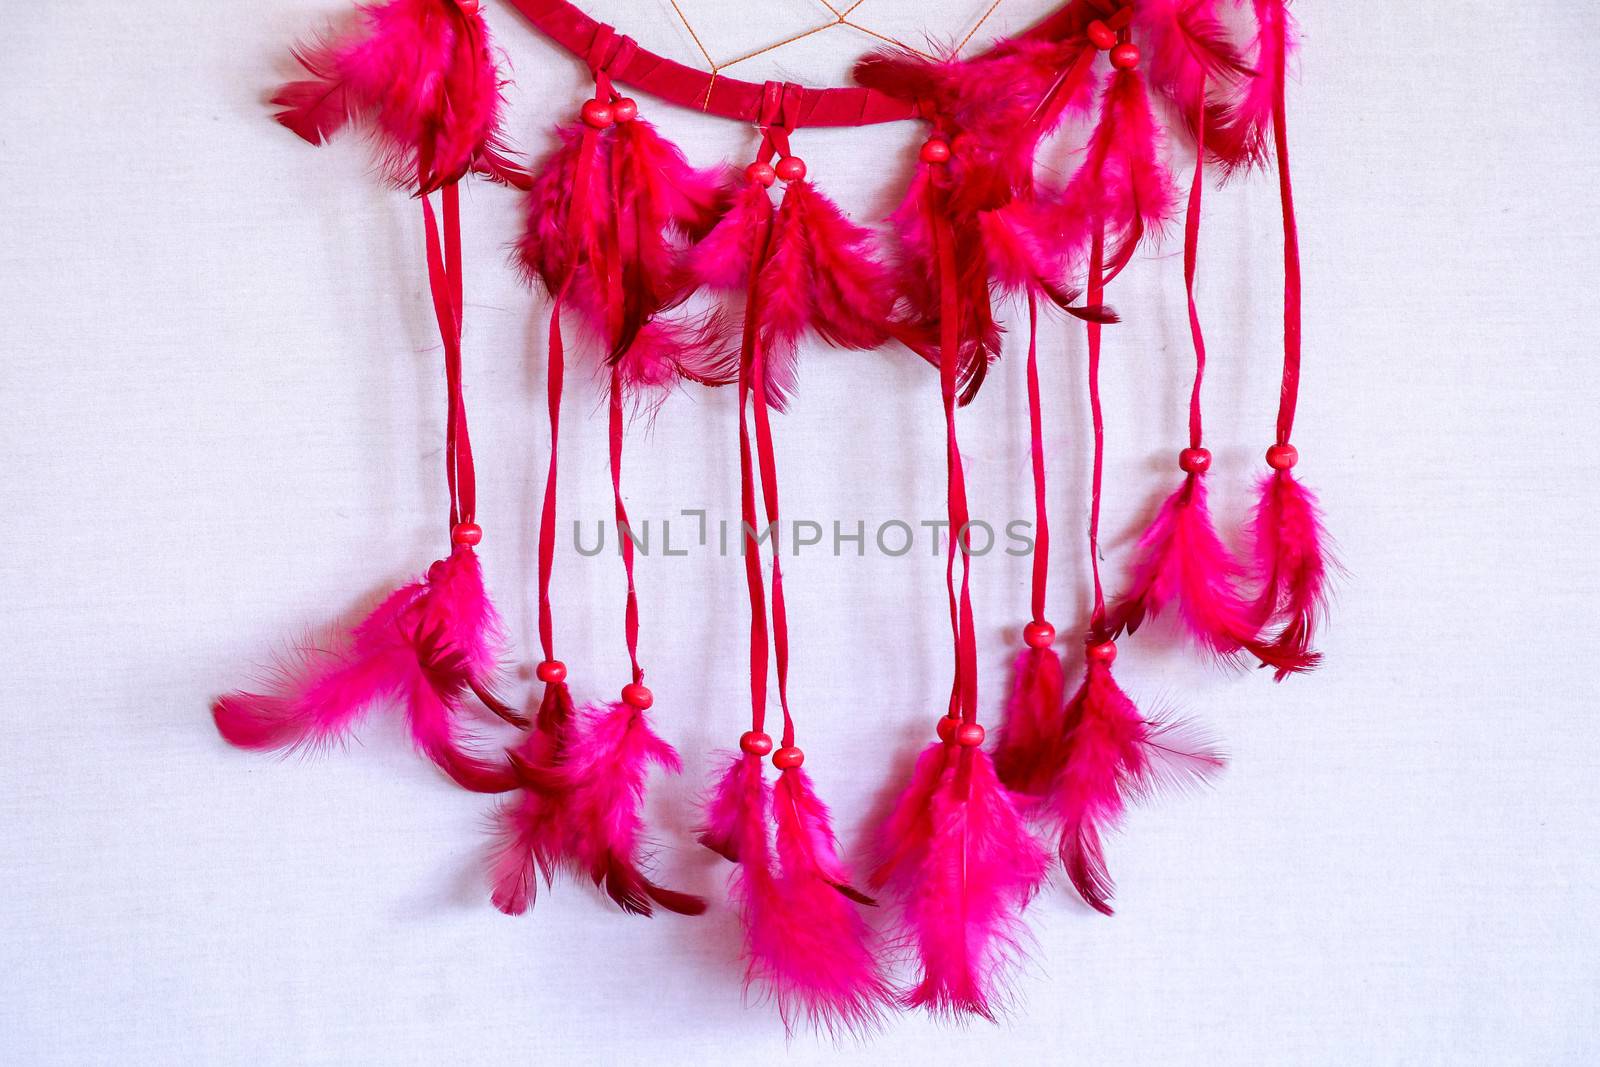 Closeup of beautiful colorful decorative red and blue feathers as dream catchers hanging near bright beads white pink and yellow colors on exhibition outdoor on blurred background, horizontal picture.